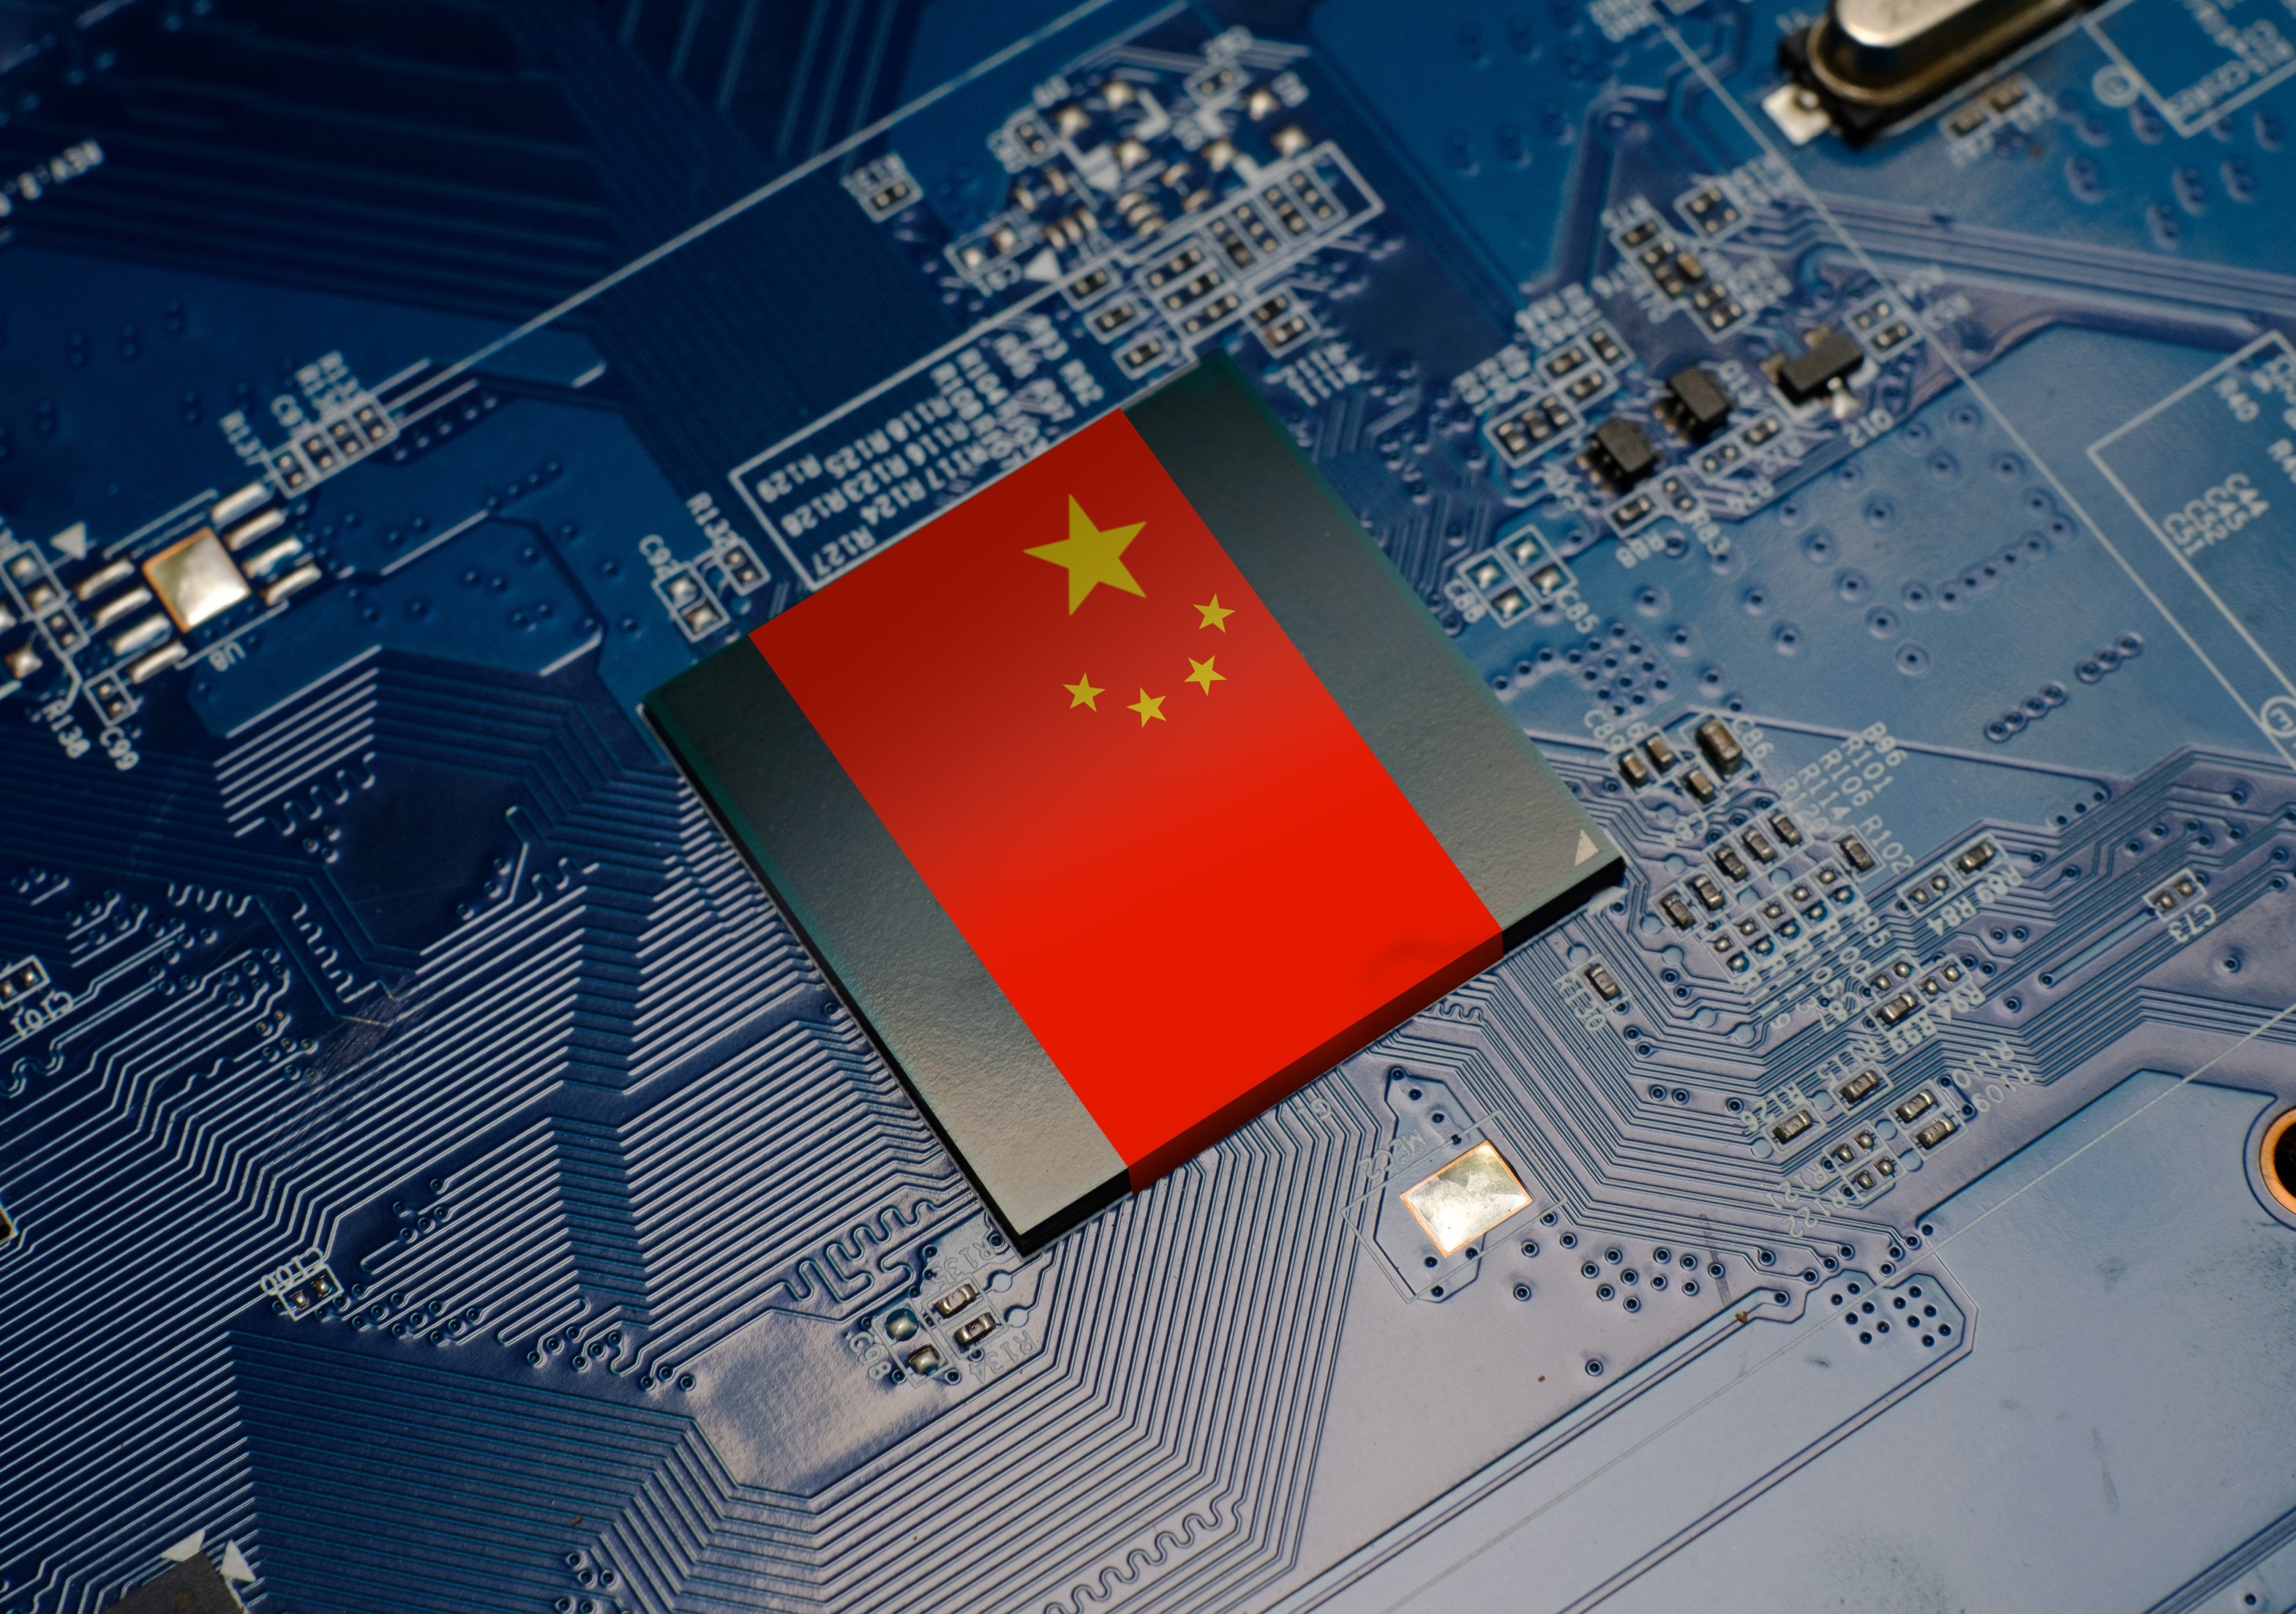 AMD says China chip unit is being restructured but denies huge job cuts. Photo: Shutterstock  